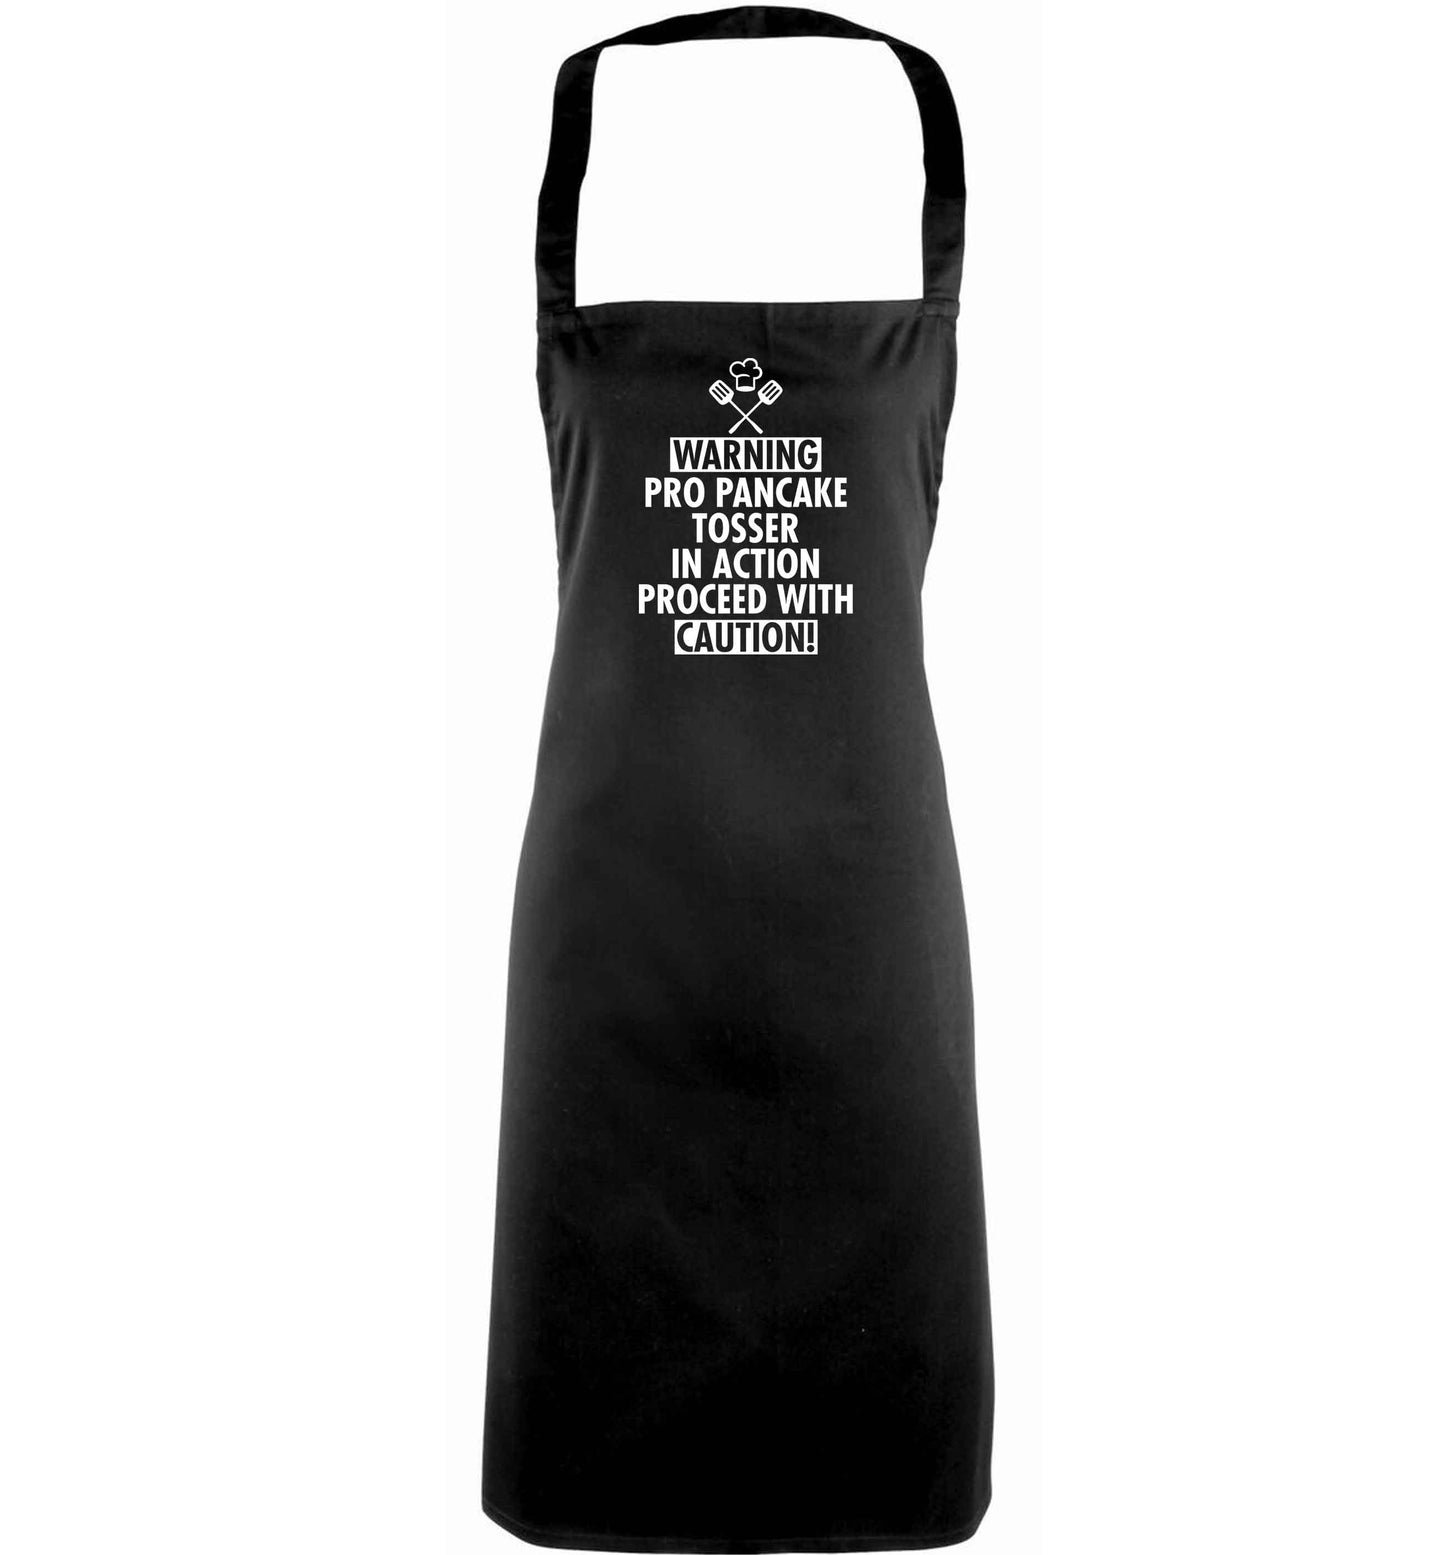 Warning pro pancake tosser in action proceed with caution adults black apron